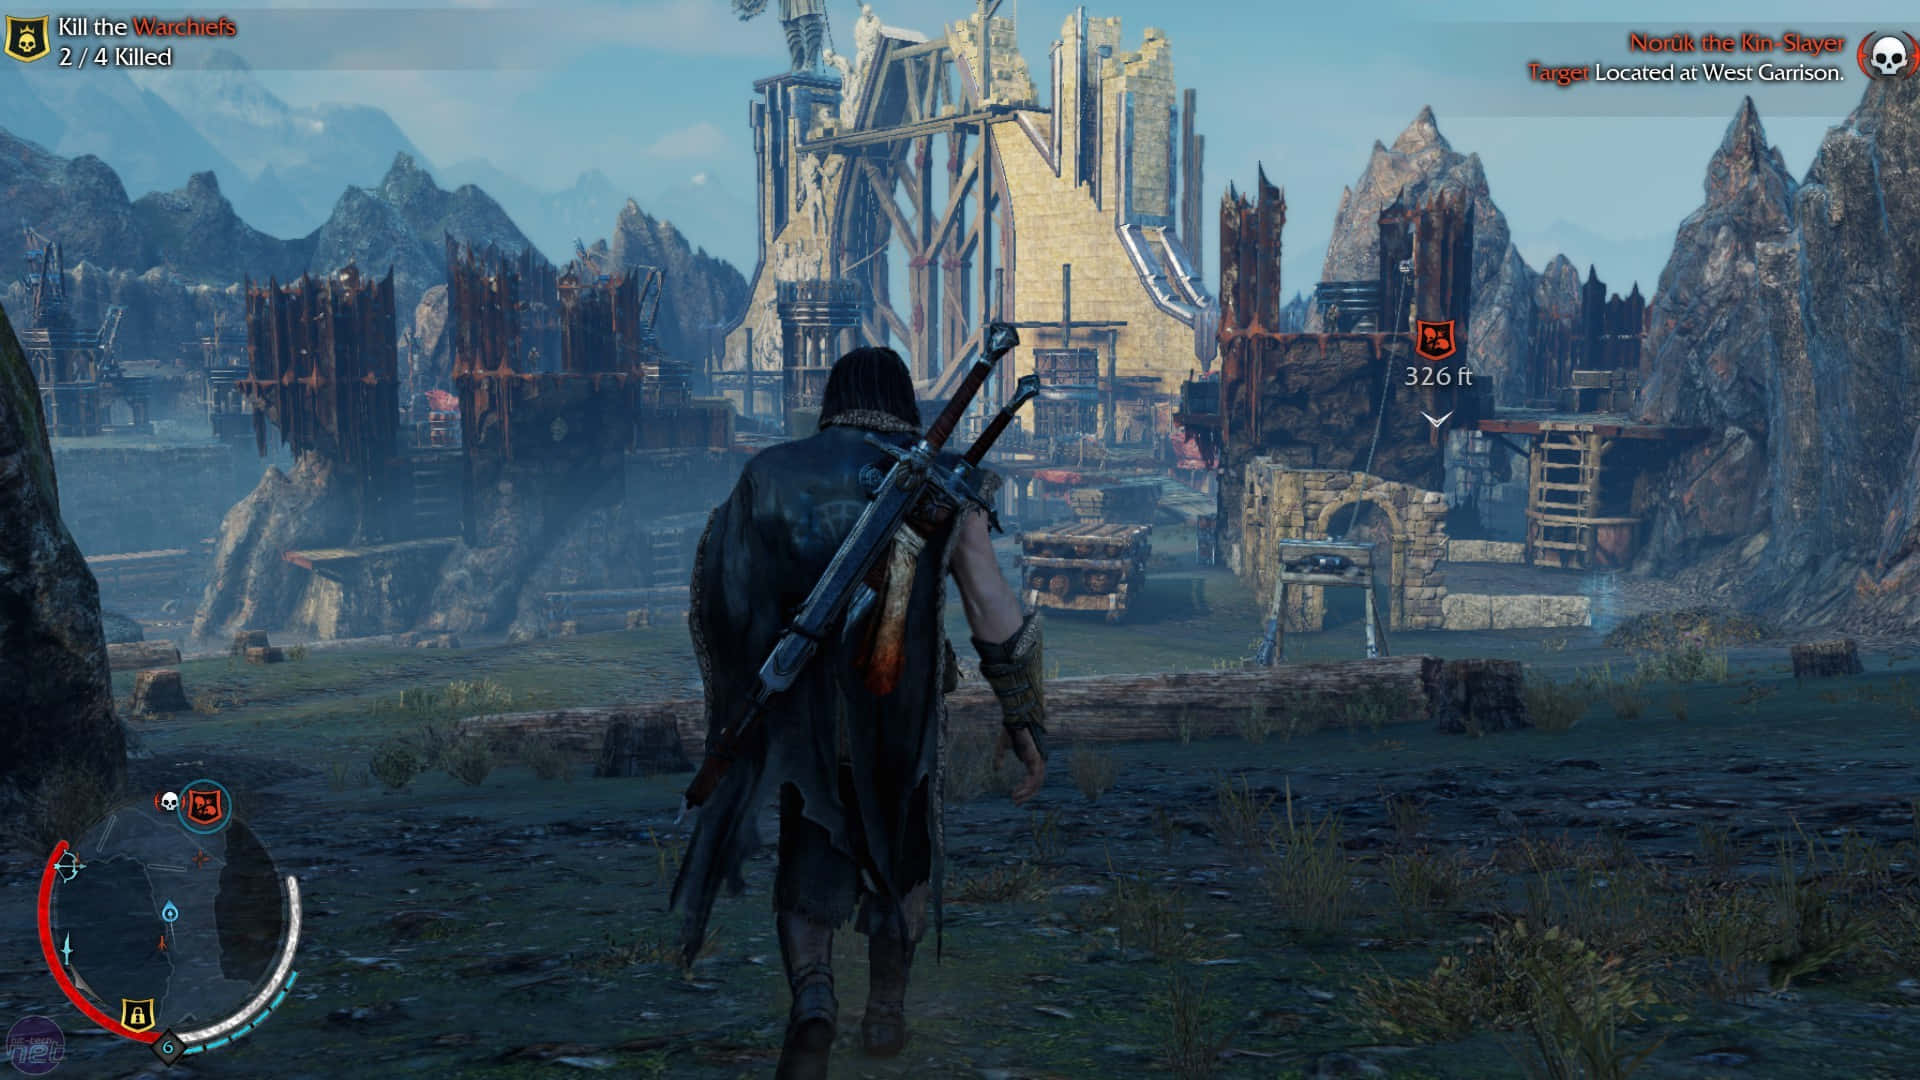 The Witcher 3 Screenshot With A Man In Front Of A Castle